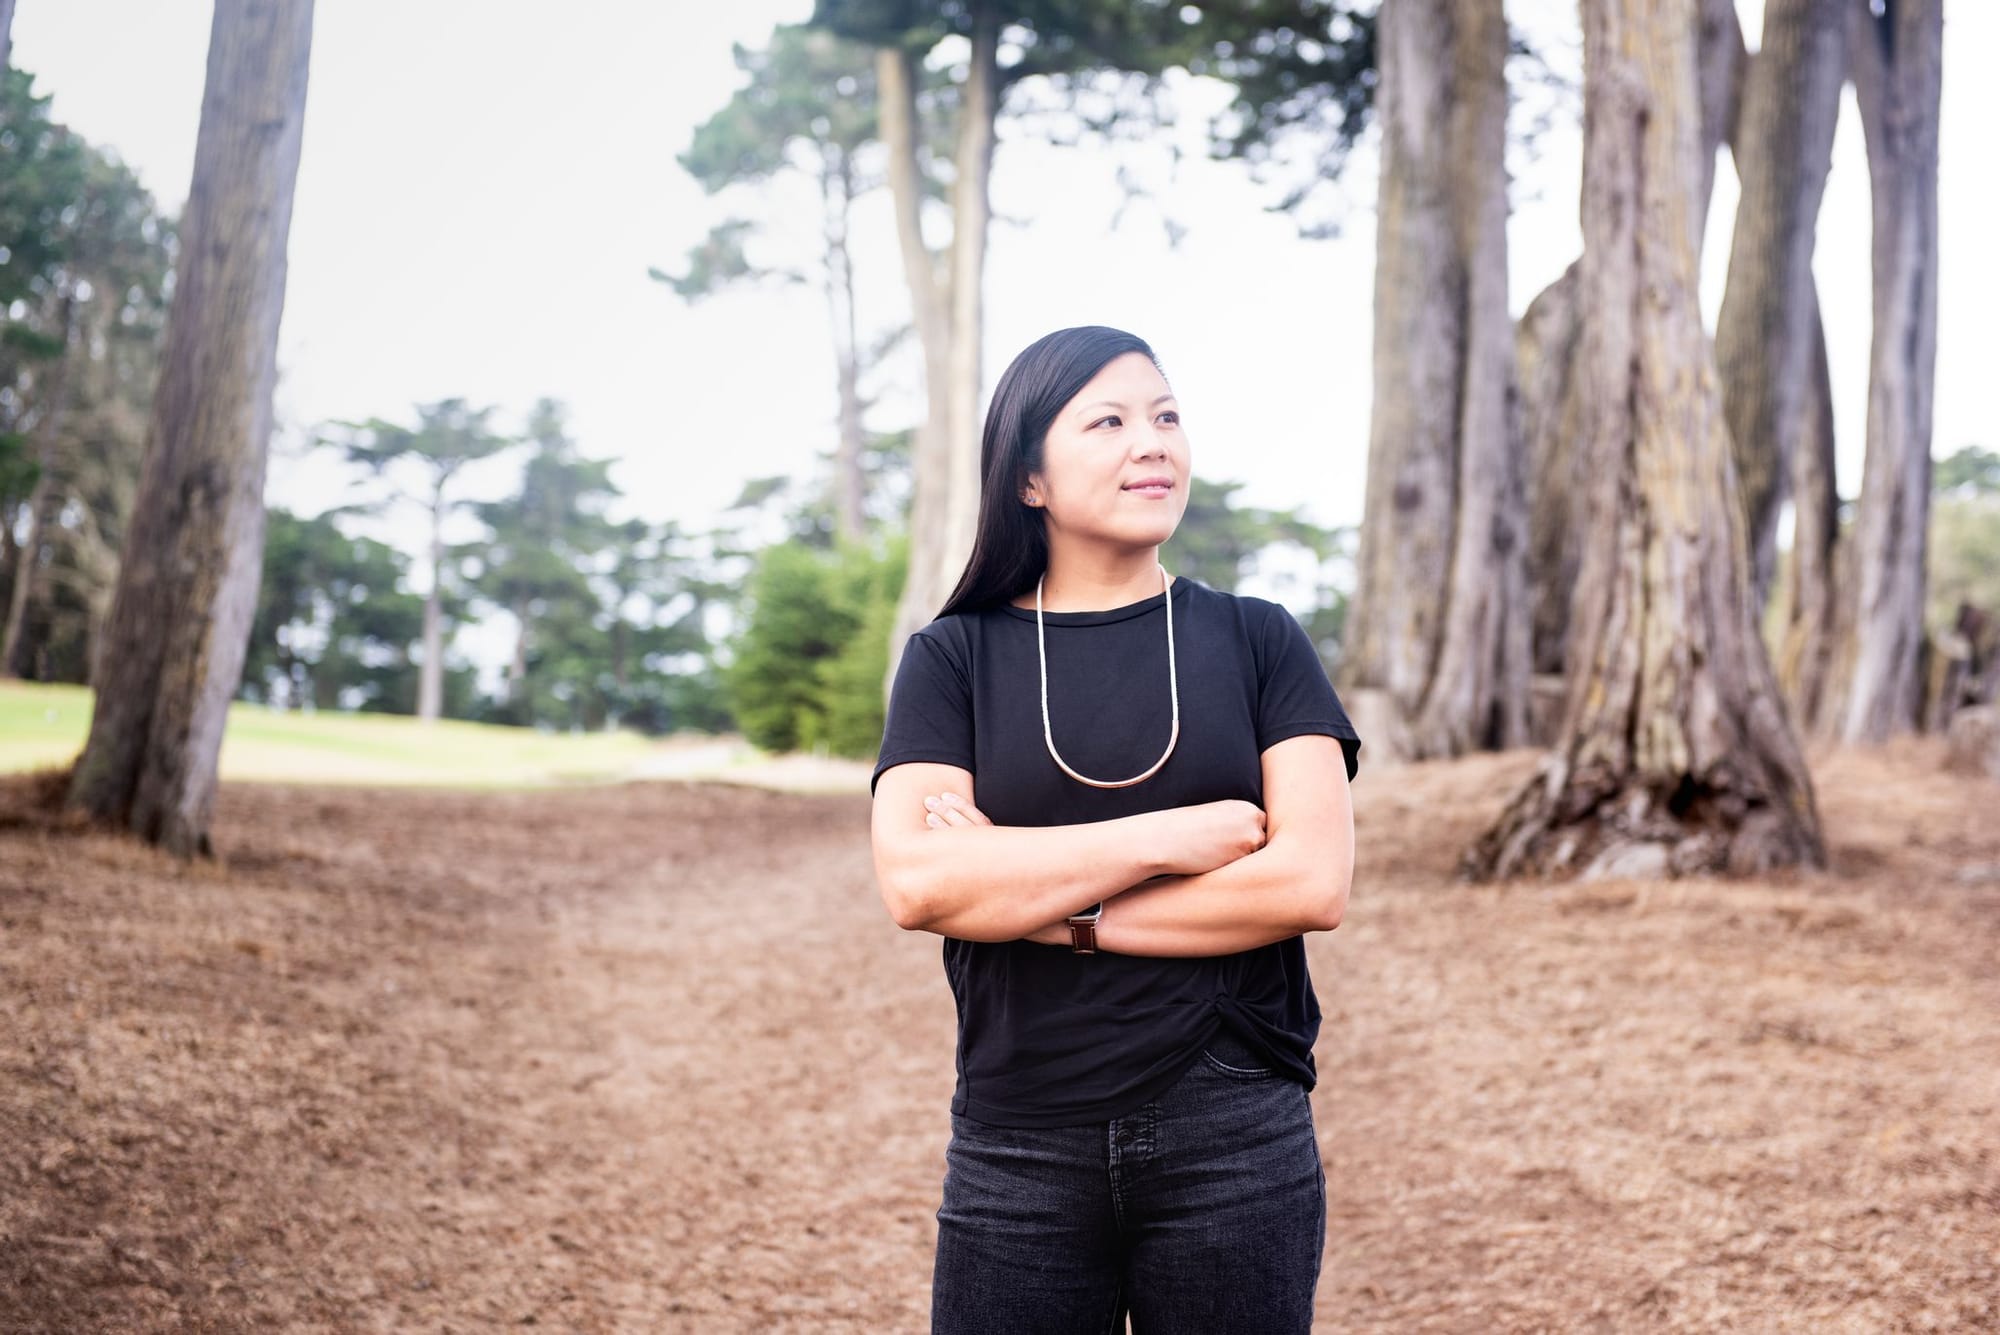 Raylene Yung, former engineering and product leader at Stripe and Facebook